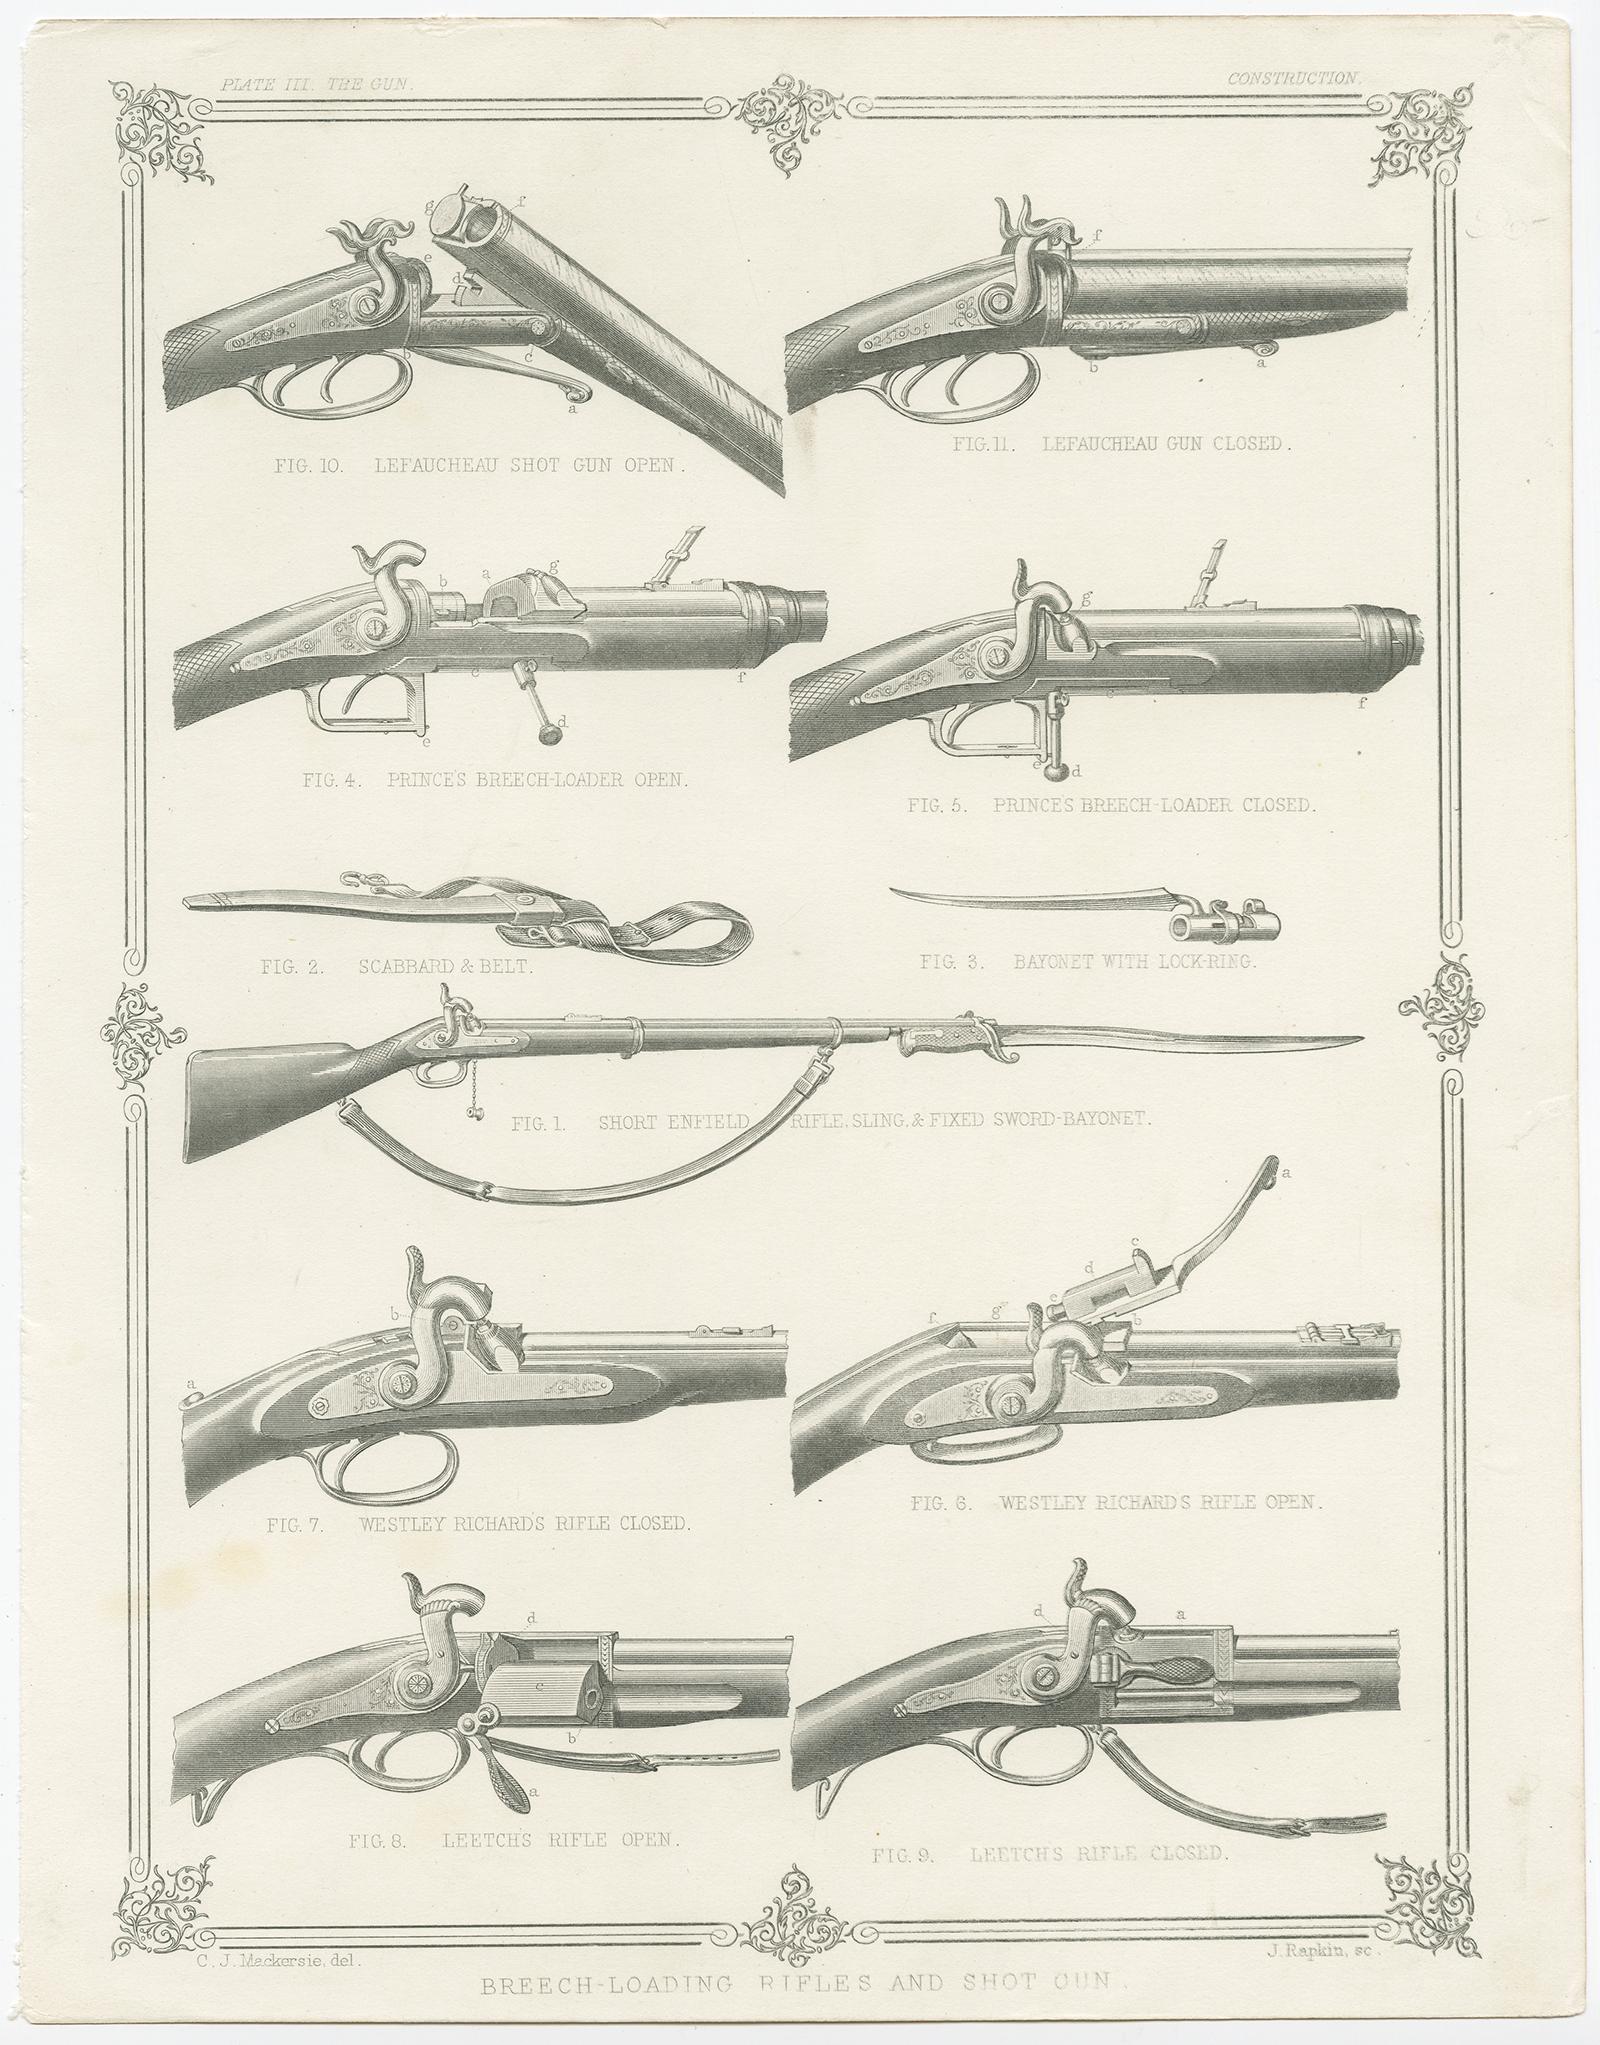 Antique print titled 'Pl. III The Gun - Breech-Loading Rifles and Shot Gun'. This print depicts Short Enfield Rifle, Scabbard & Belt, Bayonet with lock-ring, Prince's Breech-loader open, Princes breech loader closed, Westley Richards rifle open,